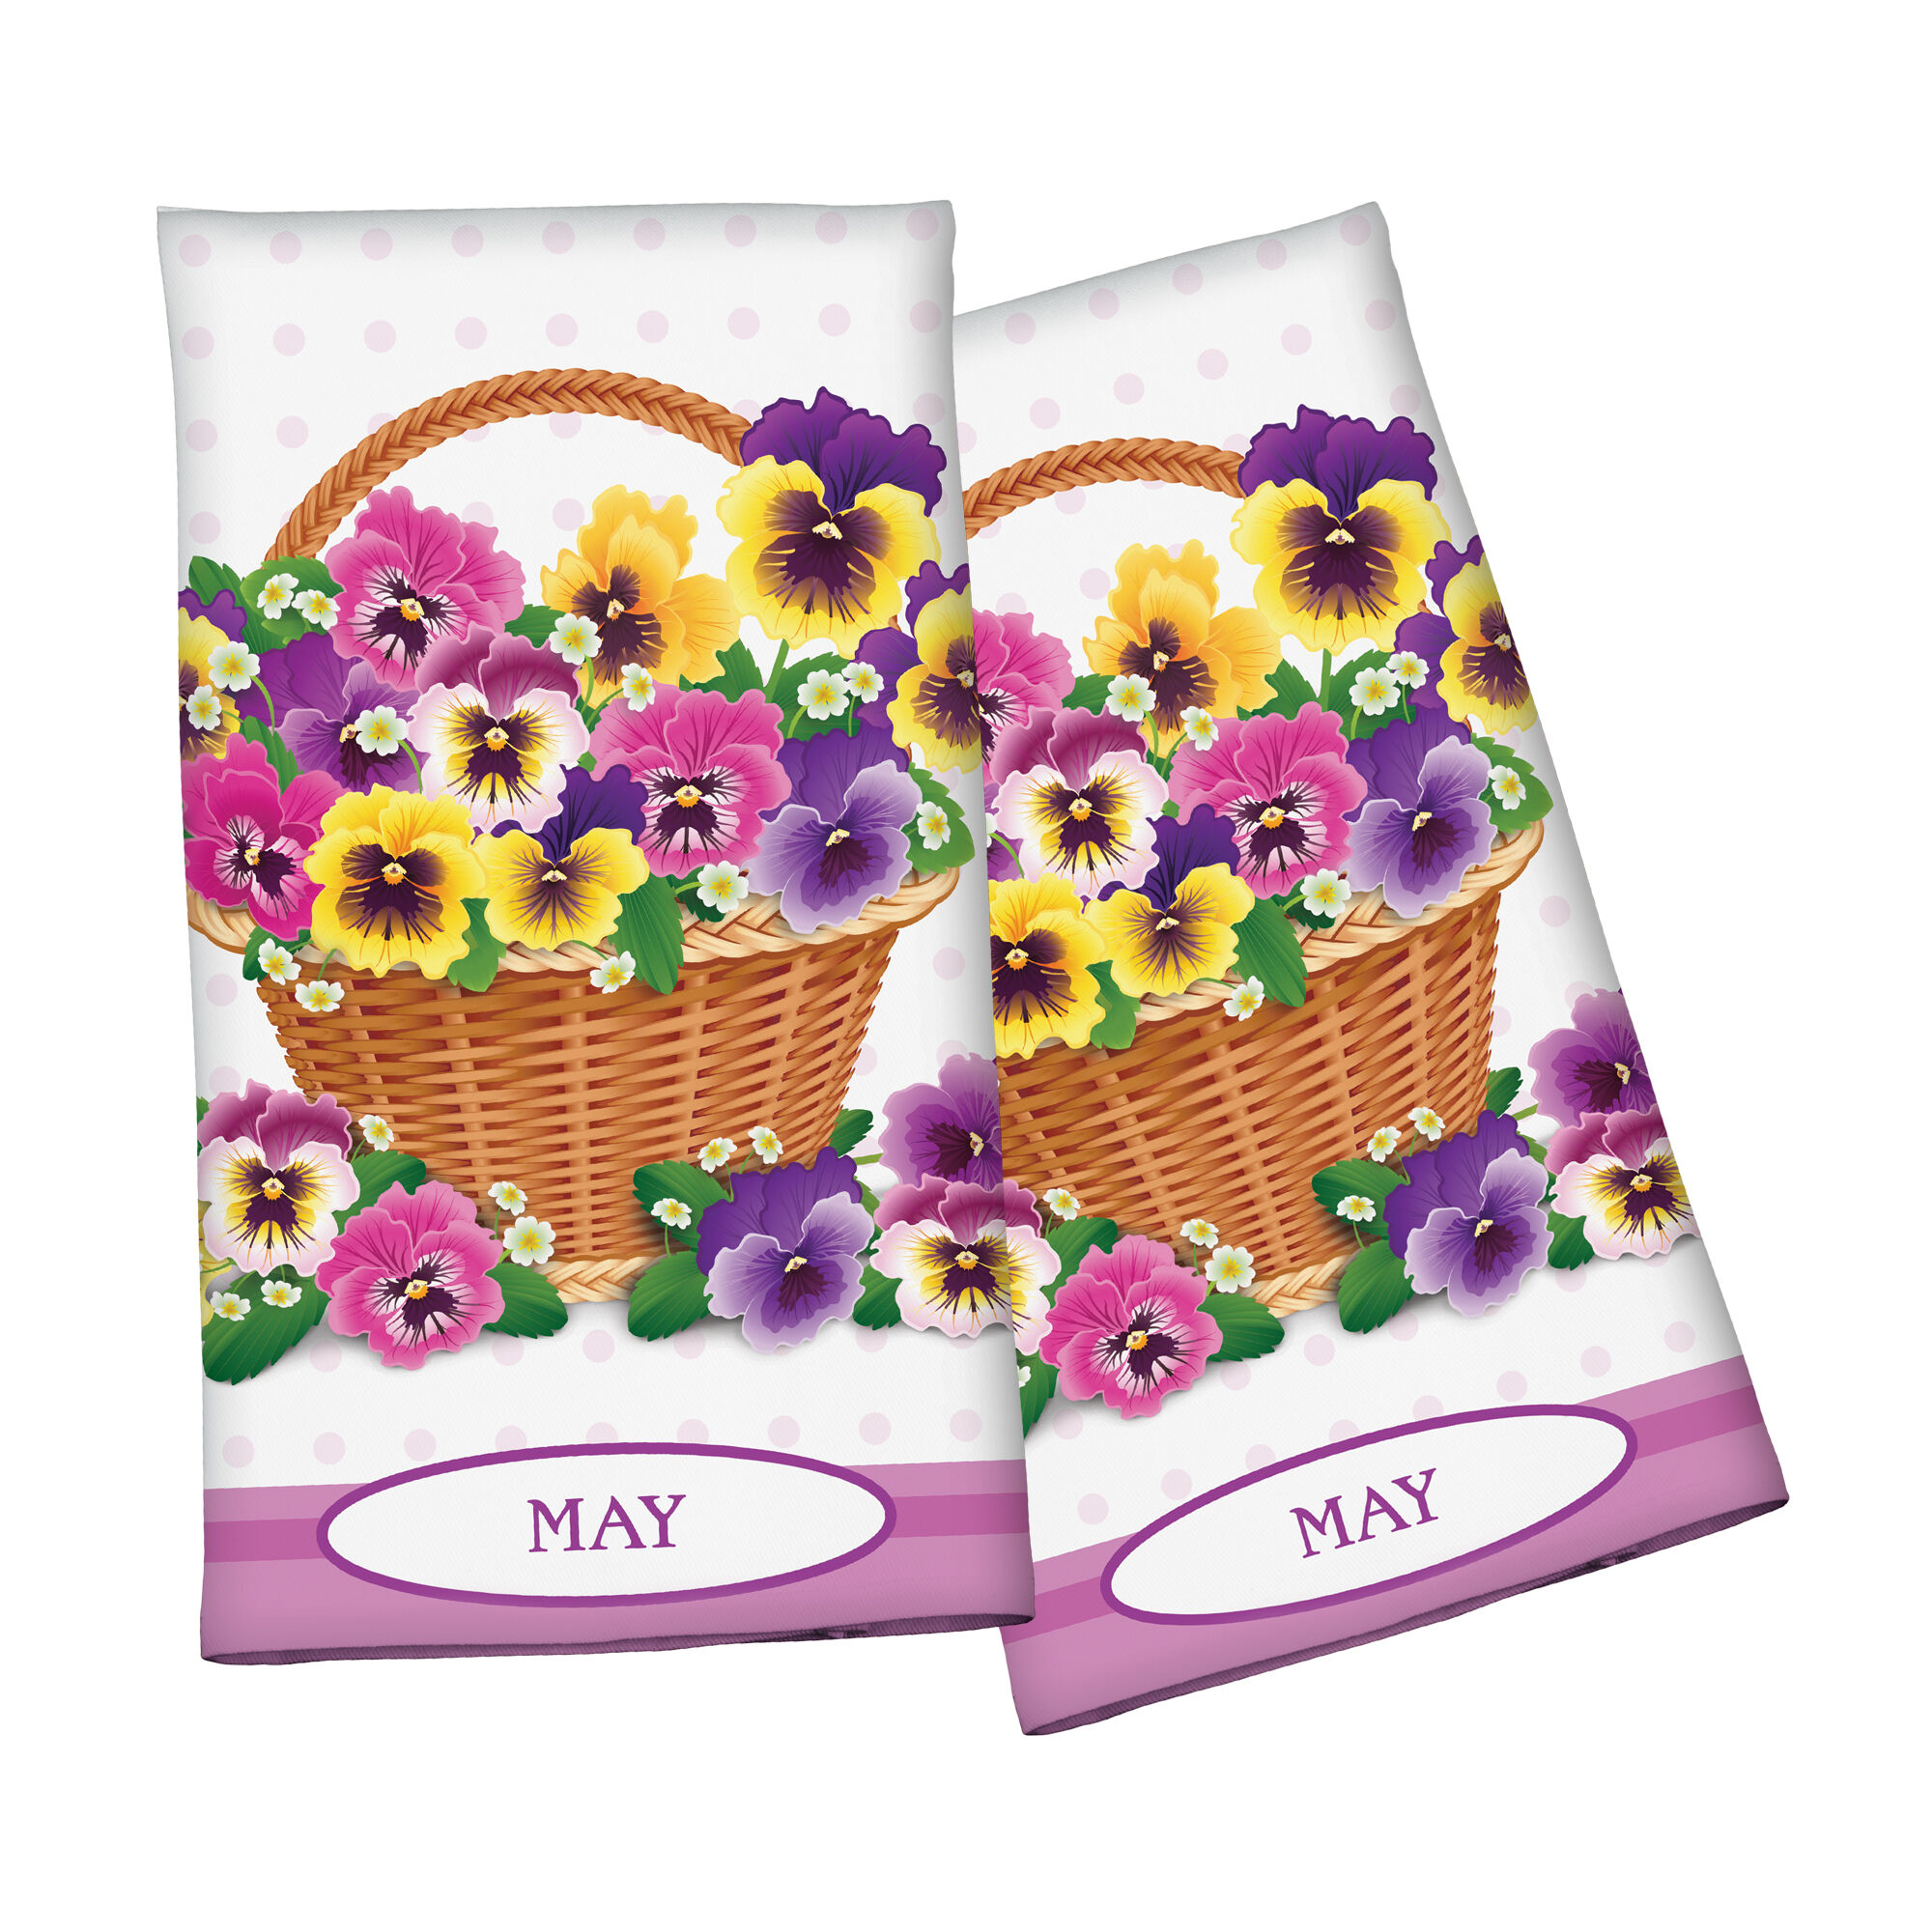 Year of Cheer Kitchen Towel Collection 6844 0015 b may